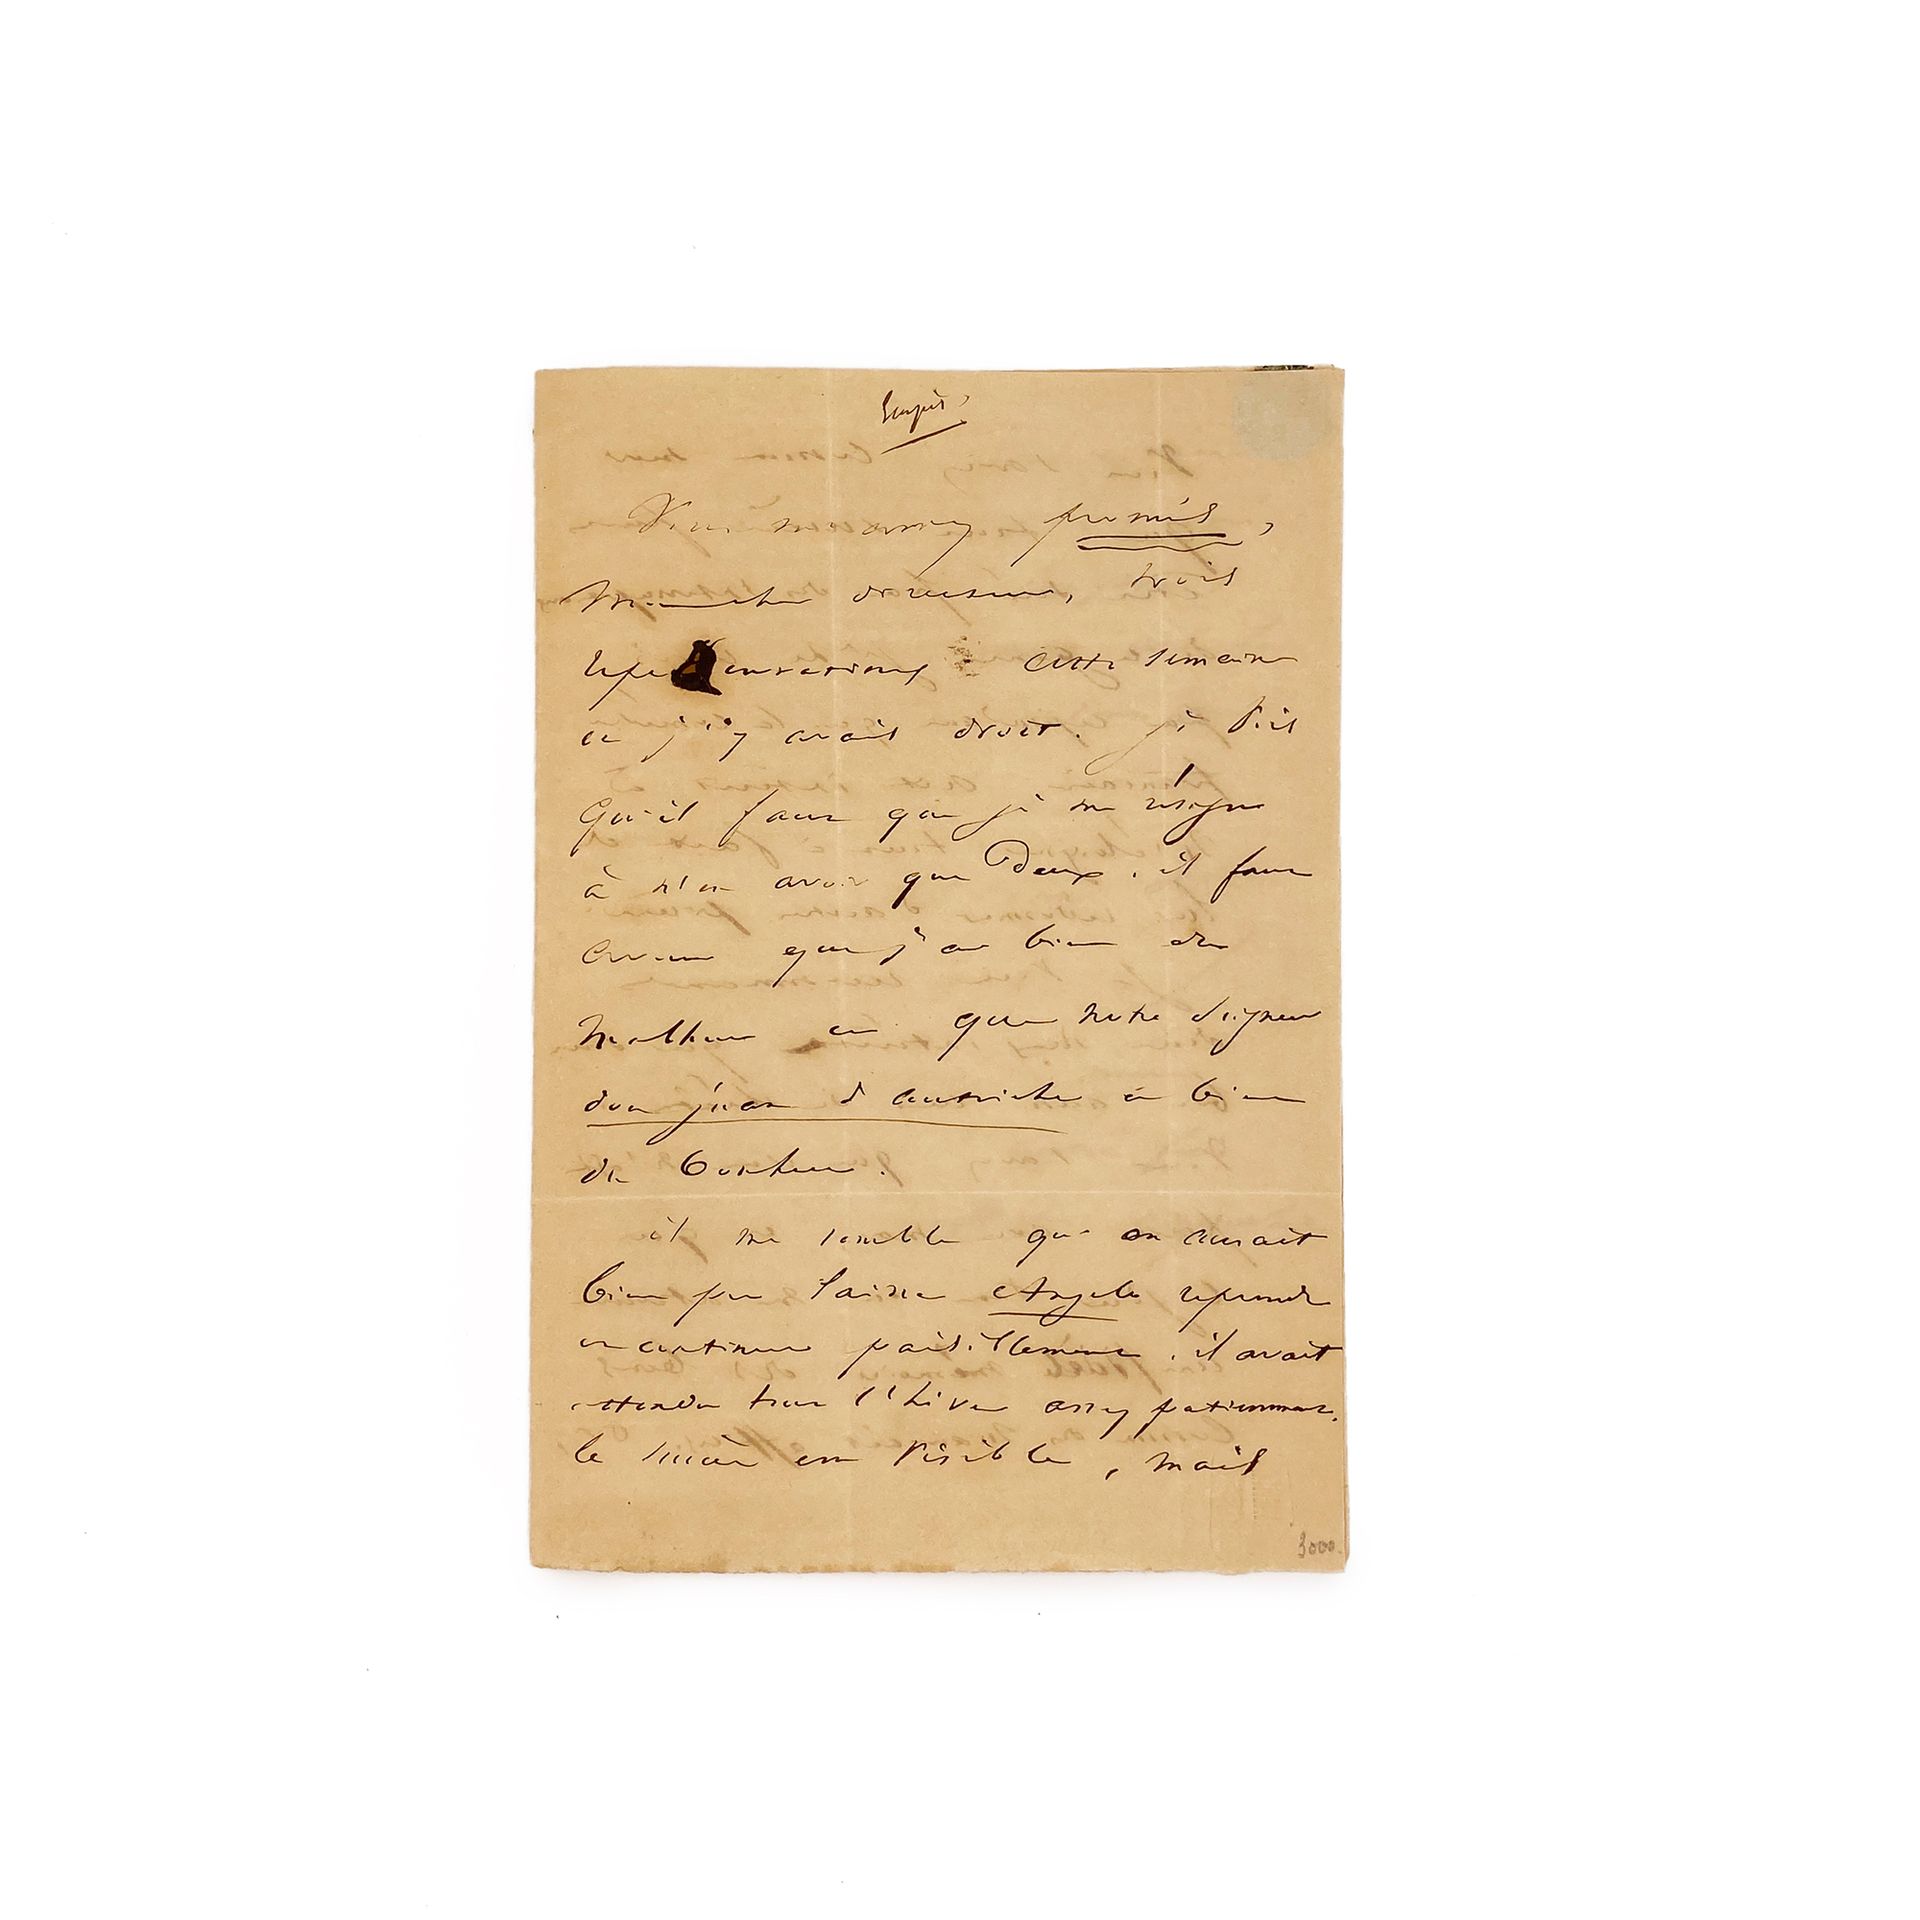 HUGO (Victor). Letter addressed to Josselin de Lasalle. Without place or date [P&hellip;